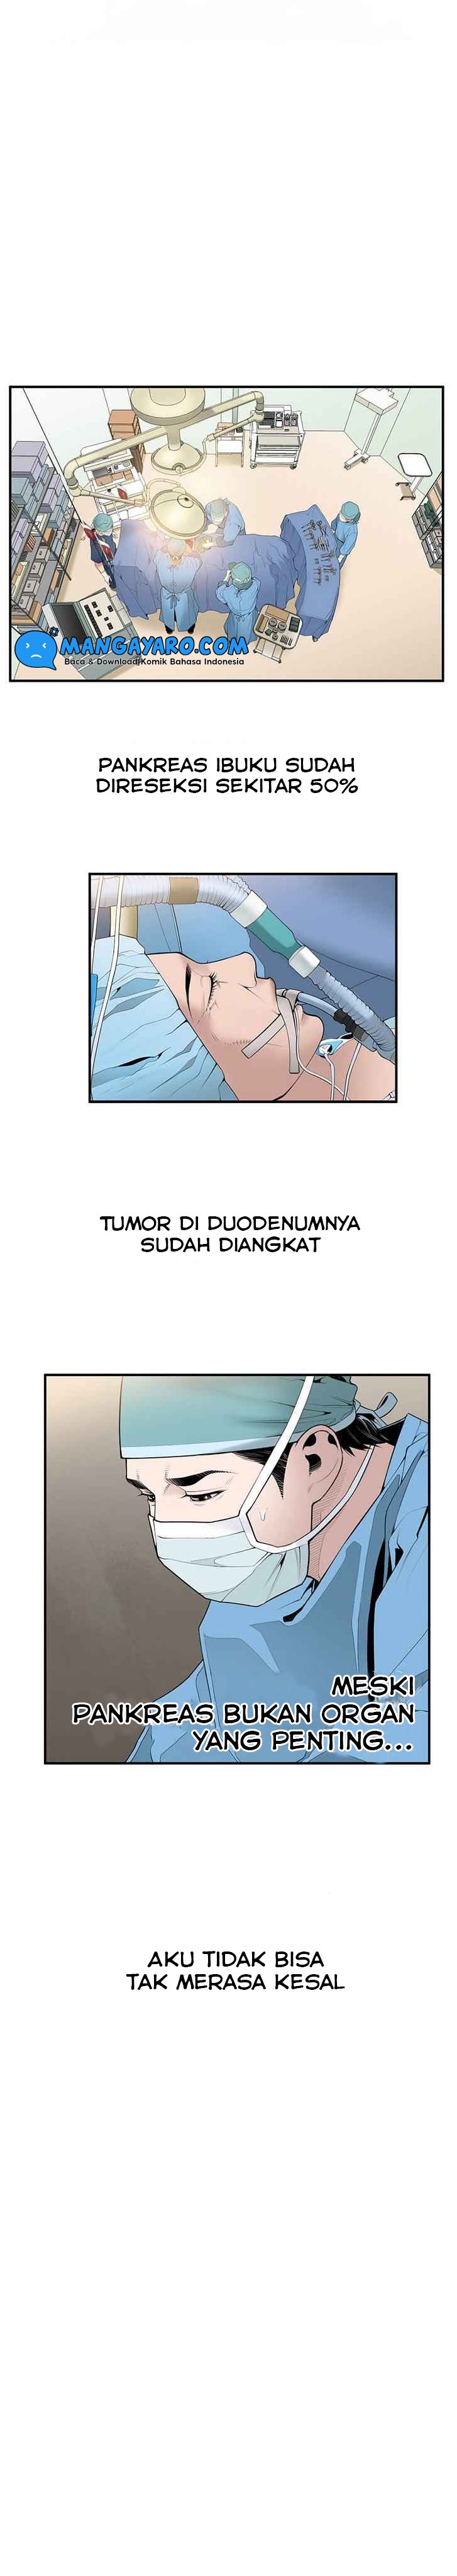 Dr. Choi Tae-Soo Chapter 21